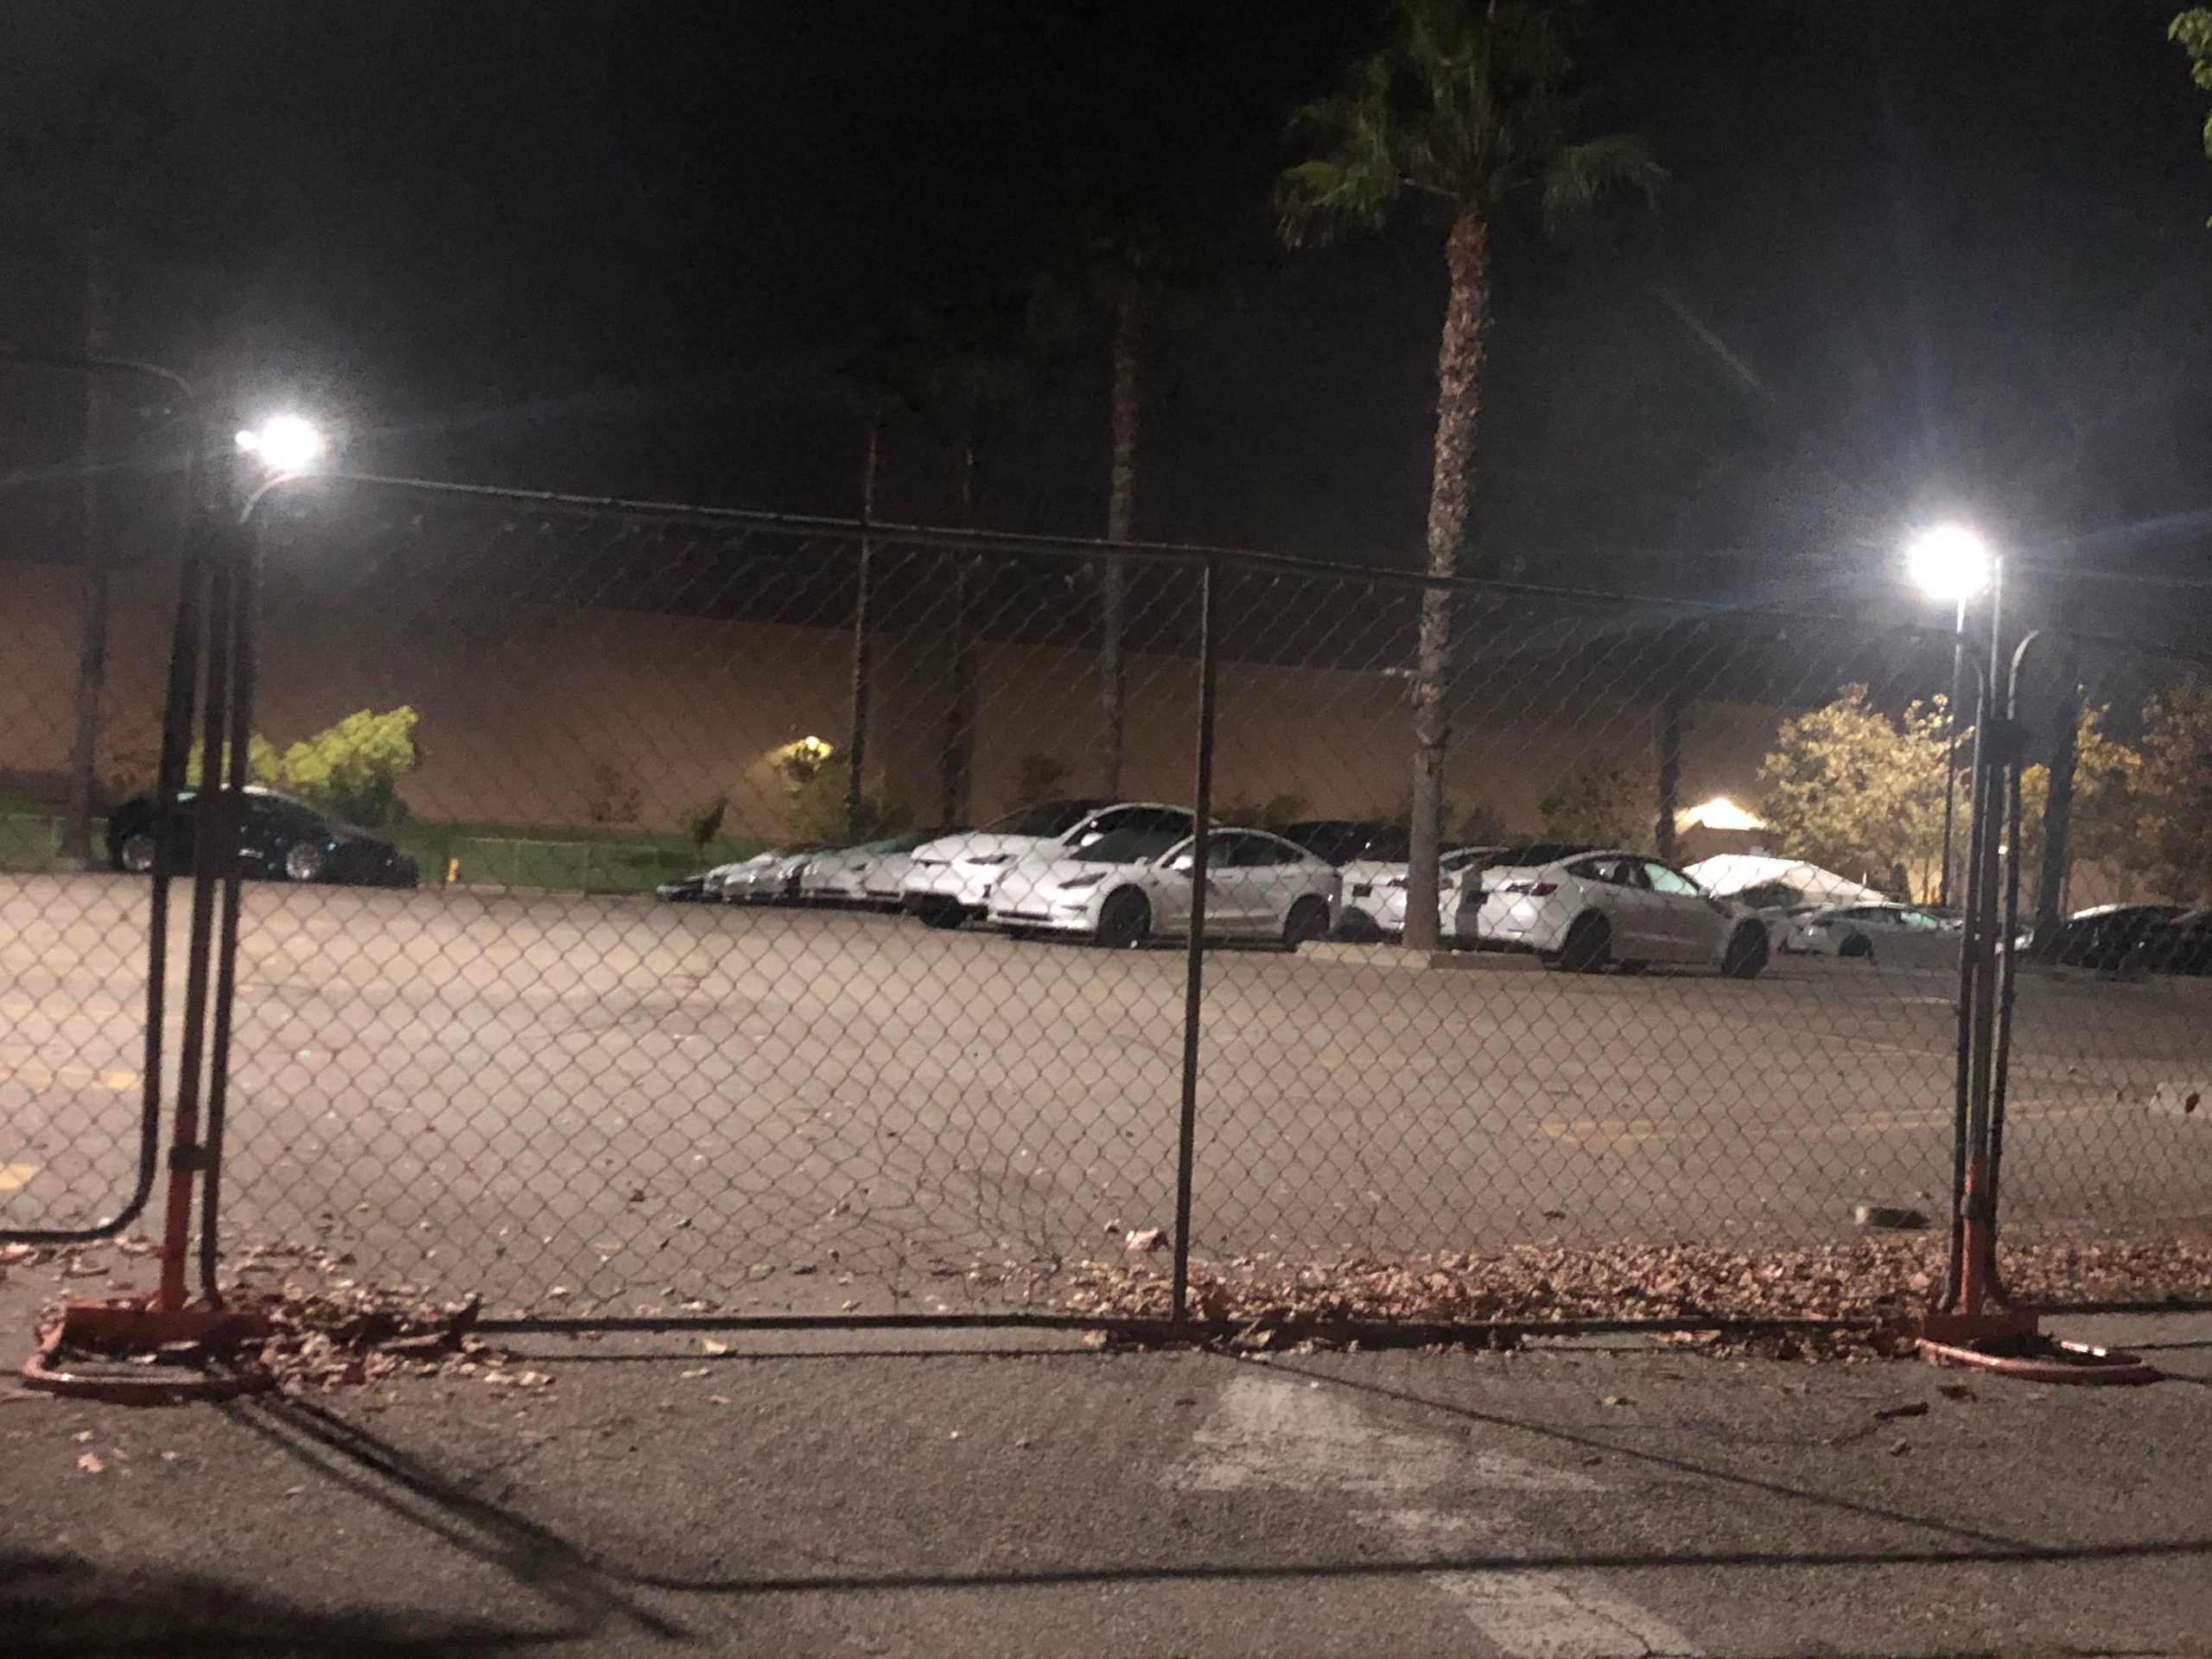 Why are there so many Teslas in this empty parking lot? In the downtown ...